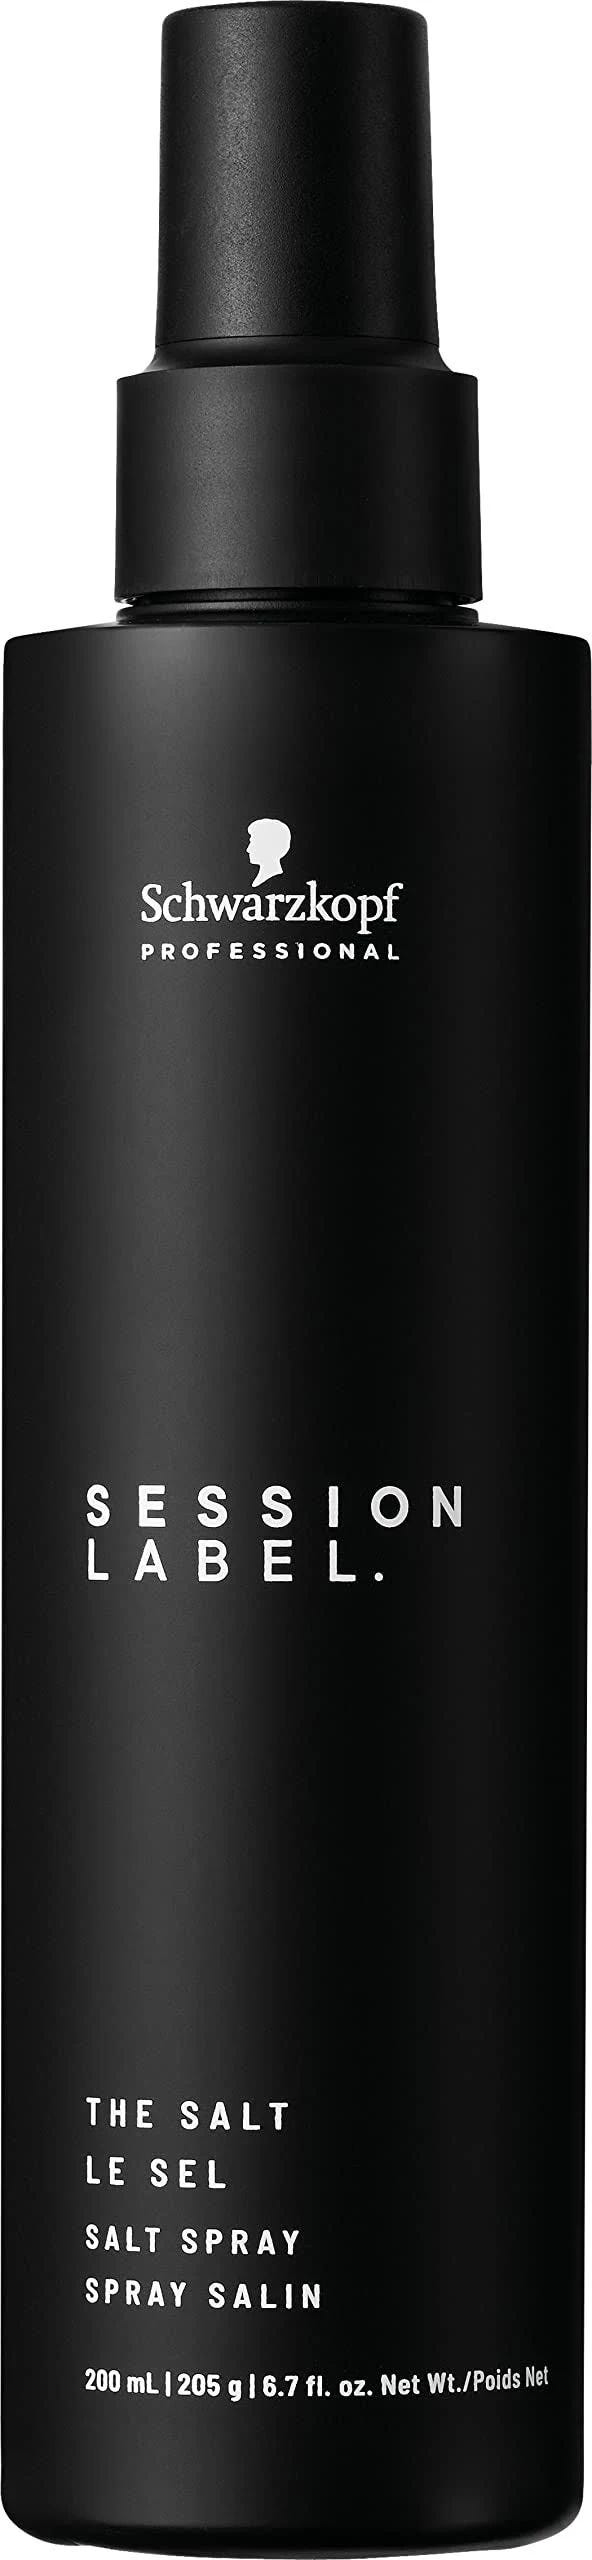 Schwarzkopf Session Label Sea Salt Spray: Texturized Tousled Look | Image